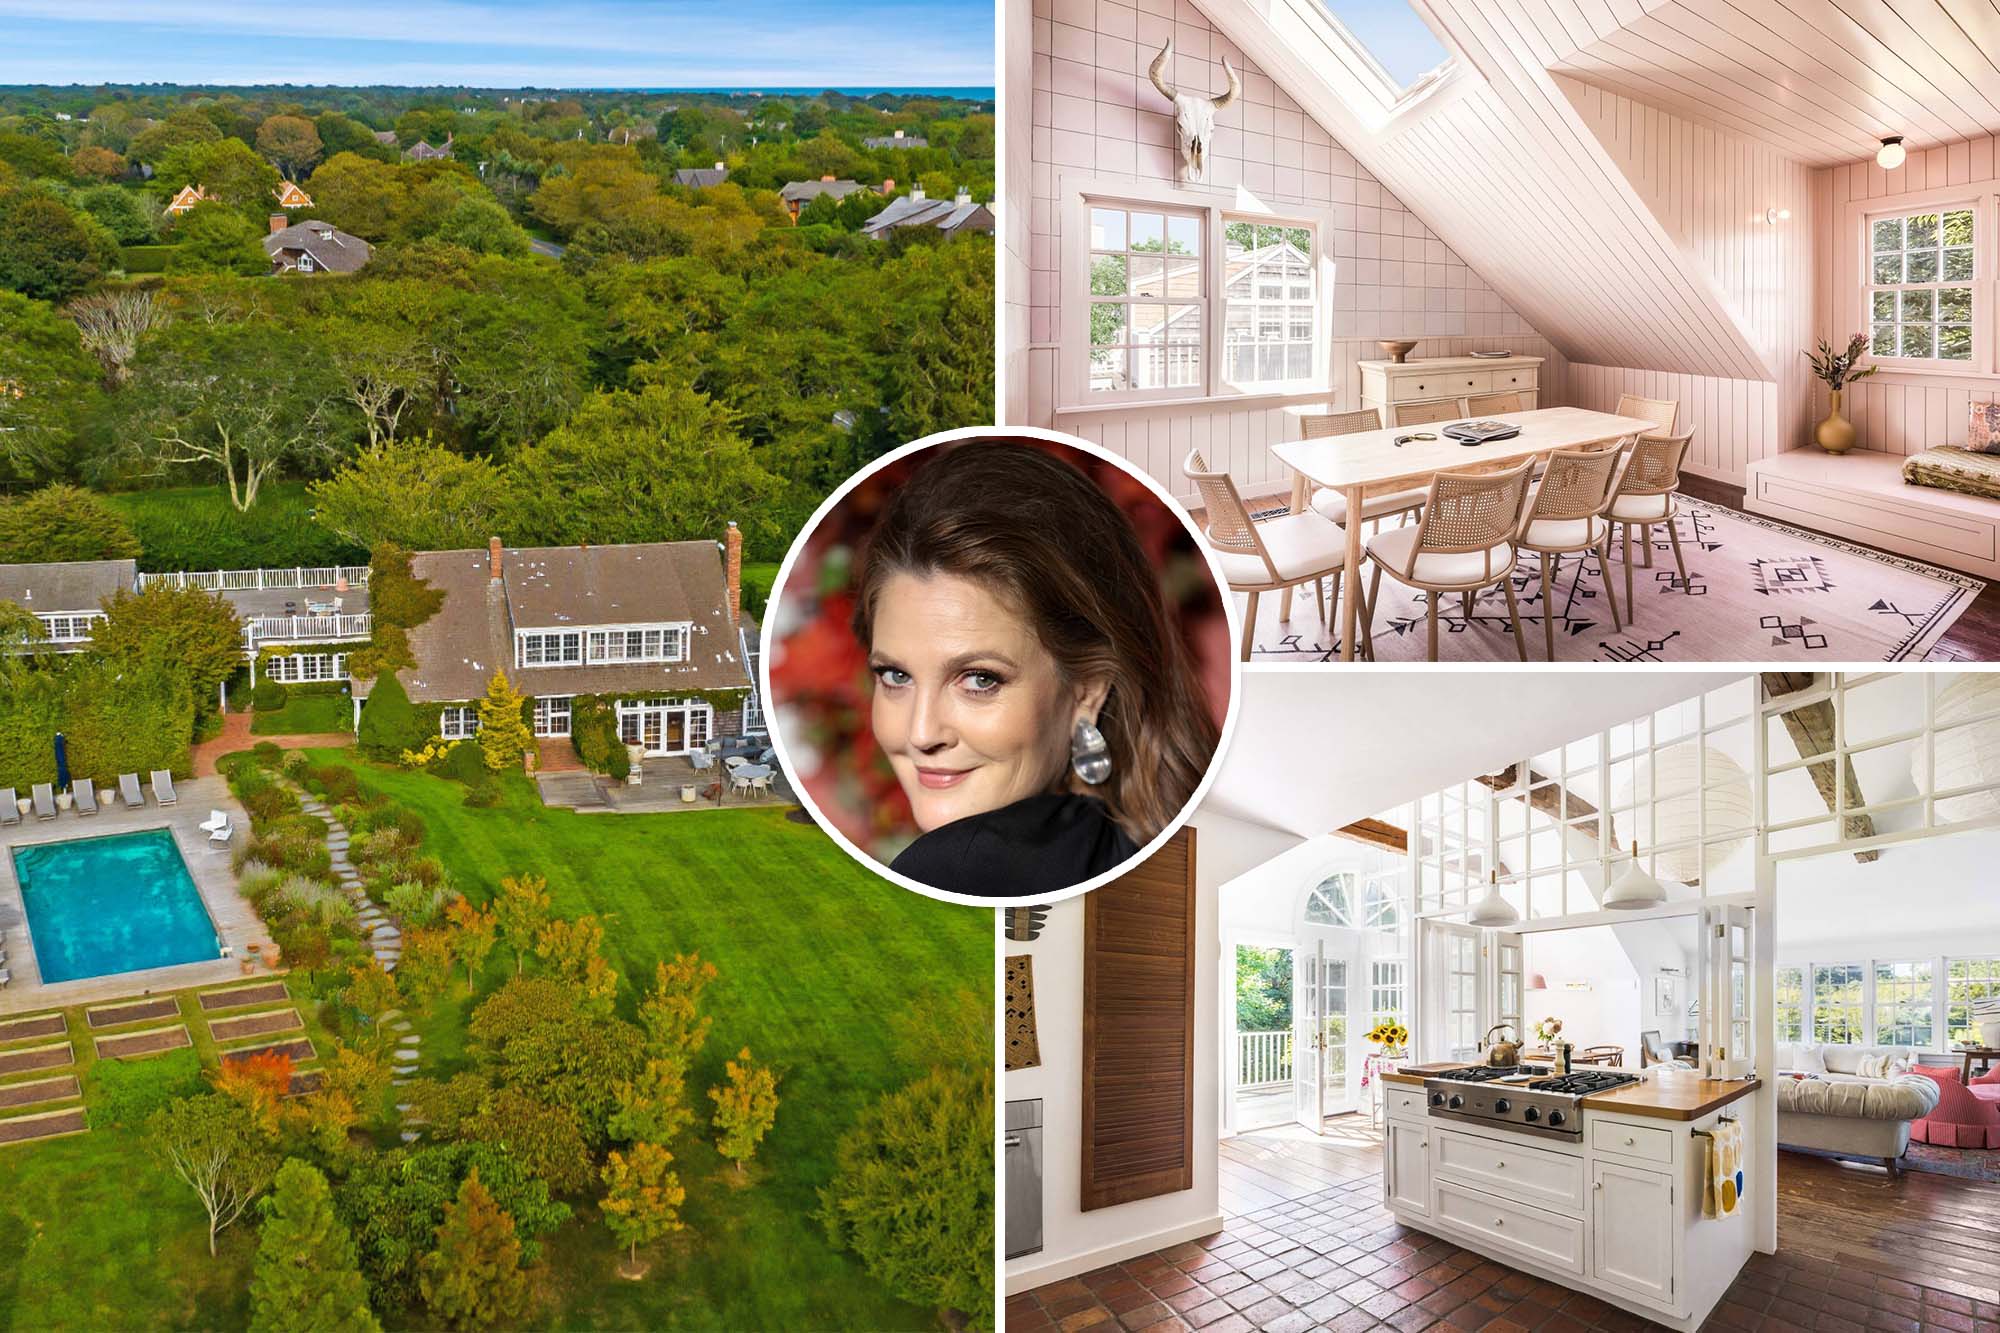 It didn’t take long for Drew Barrymore to find a buyer for her gorgeous Hamptons home